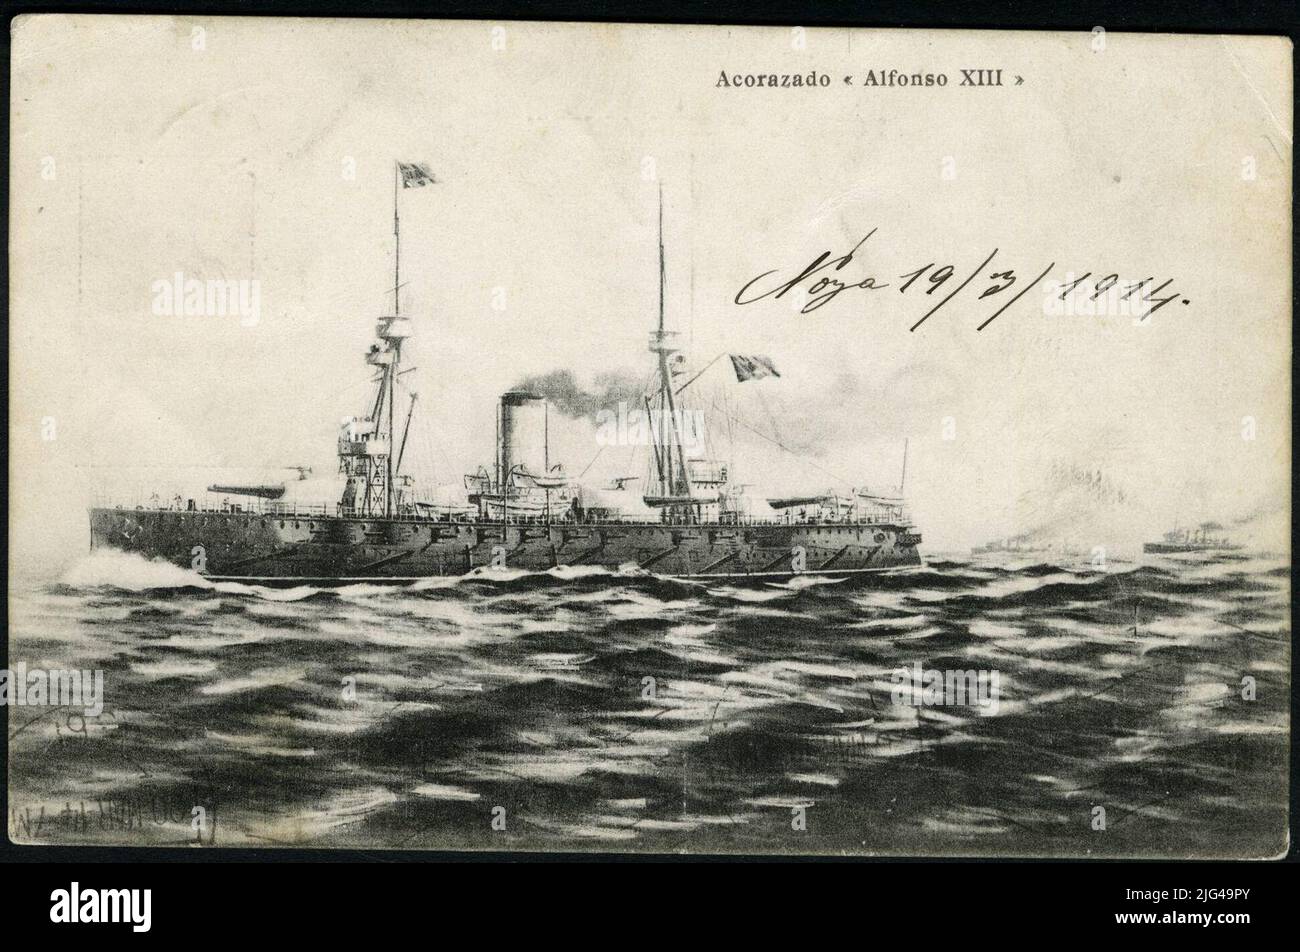 Alfonso XIII Alfonso. Reasoned classification: Postcard's photography shows the reproduction of a drawing of the battleship 'Alfonso XIII' in the sea. Alfonso XIII, was the second of a series of three battleships Dreadnough model built by Spain at the beginning of the 20th century. The launch of it took place on May 7, 1913 in the Shipyard of Ferrol (A Coruña), the same in which she was built. The first mission of Alfonso XIII was to monitor the Spanish coast during World War I. She was also the first Spanish warship that entered Cuba after her independence. He also participated in the landing Stock Photo